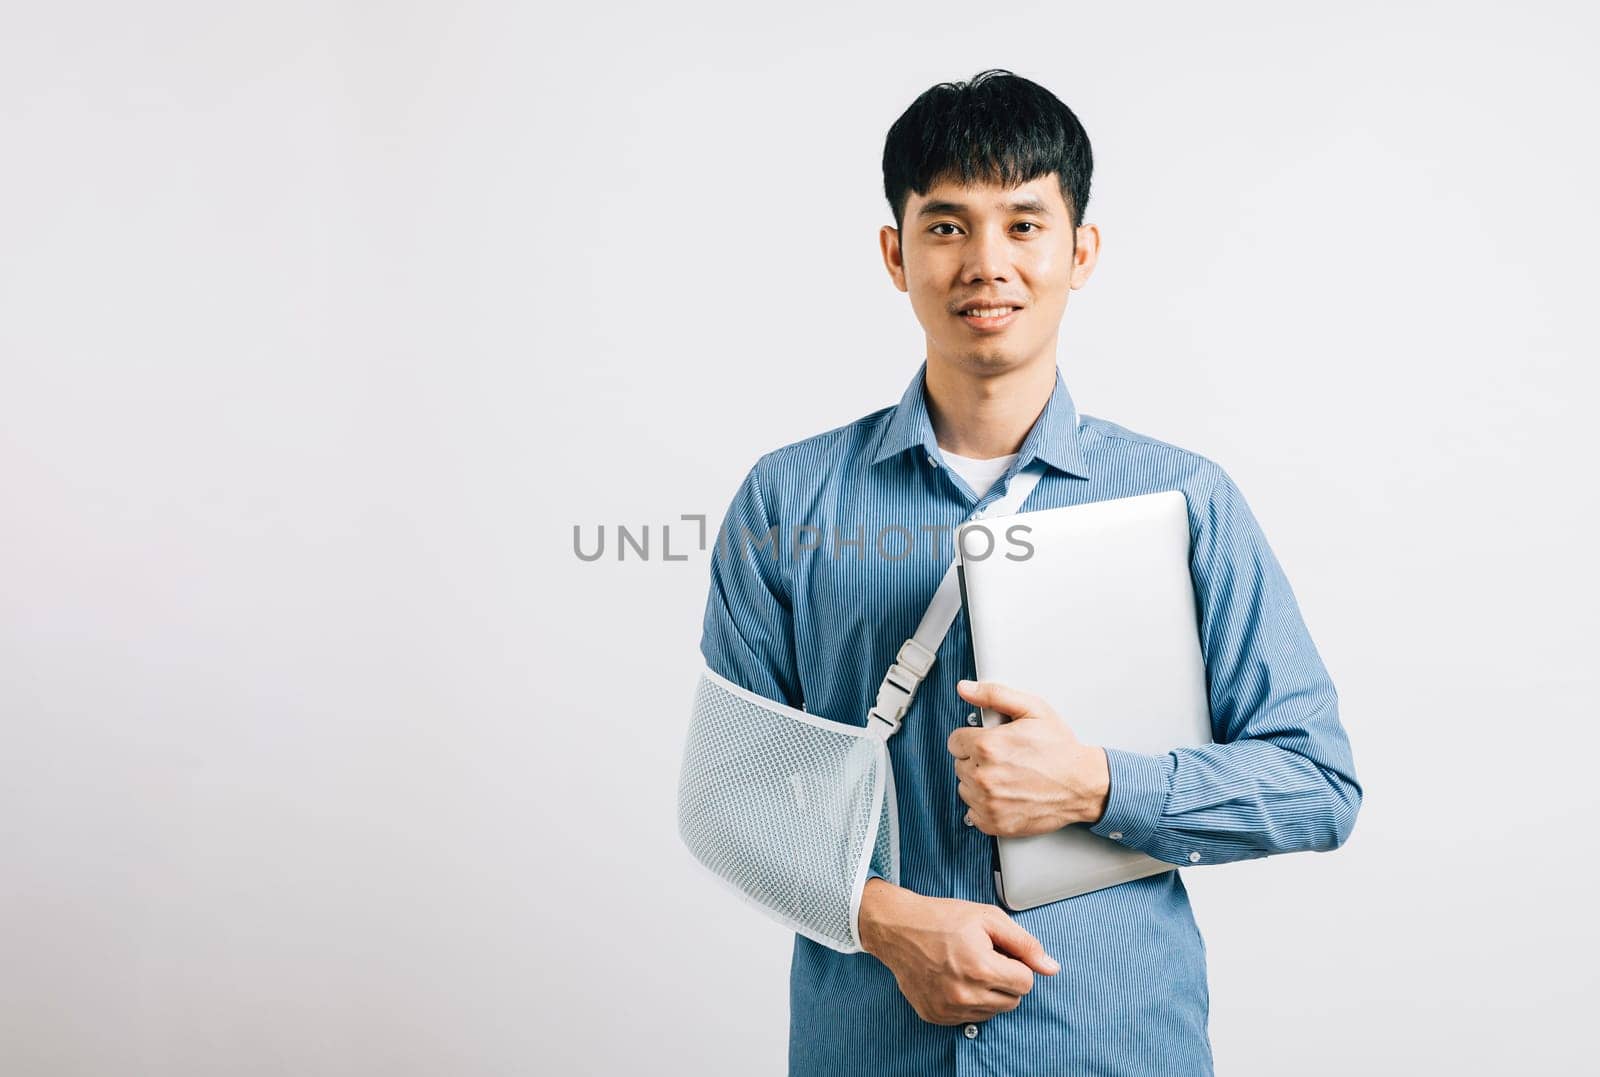 Confident Asian businessperson, with a broken arm, carries on working with a laptop, supported by a splint. Studio shot isolated on white, emphasizing determination and recovery. Copy space is offered